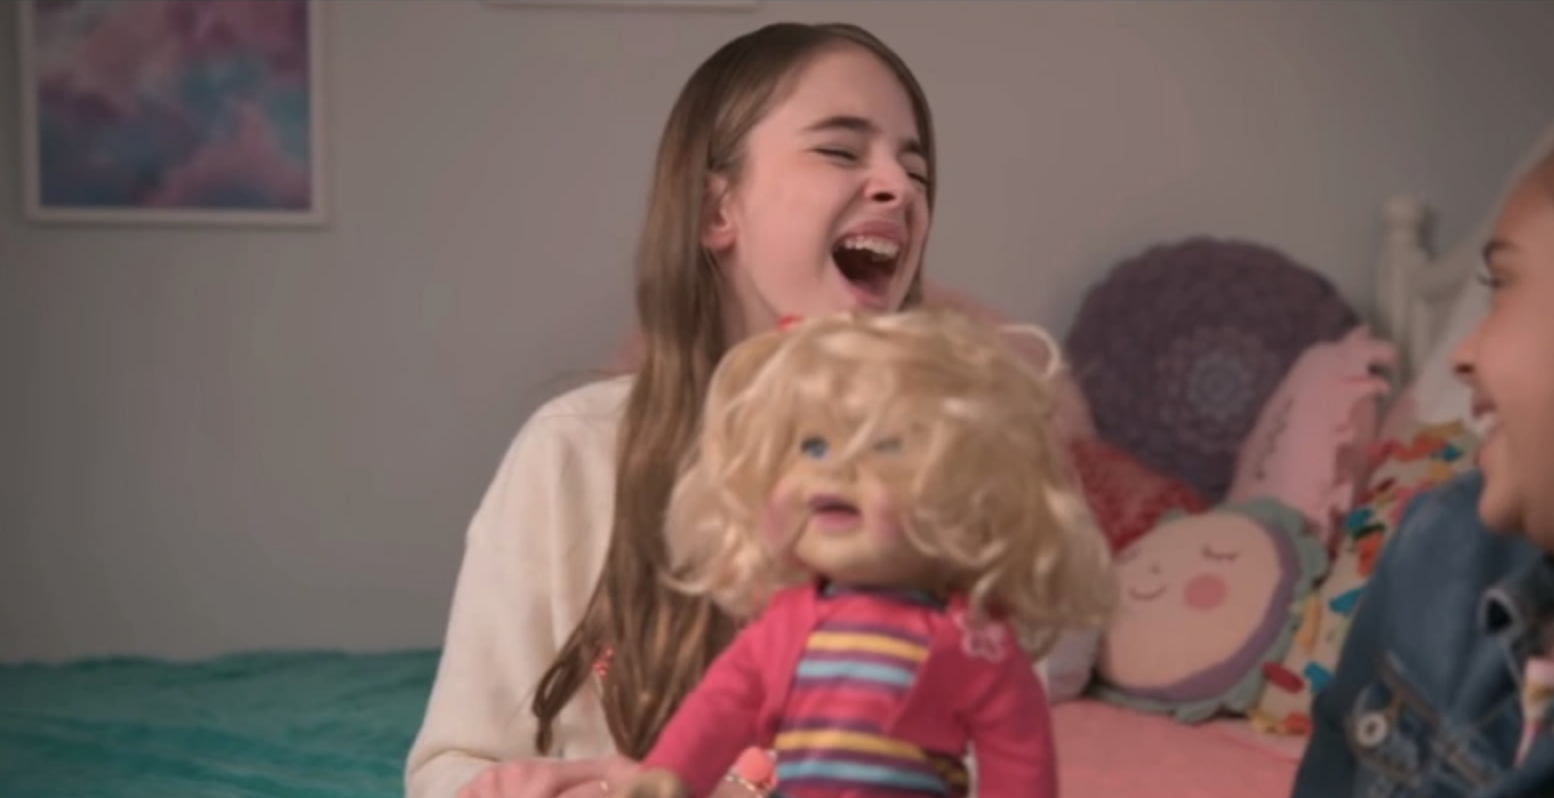 a young girl with long hair holds a doll with curly hair. the girl laughs maniacally.